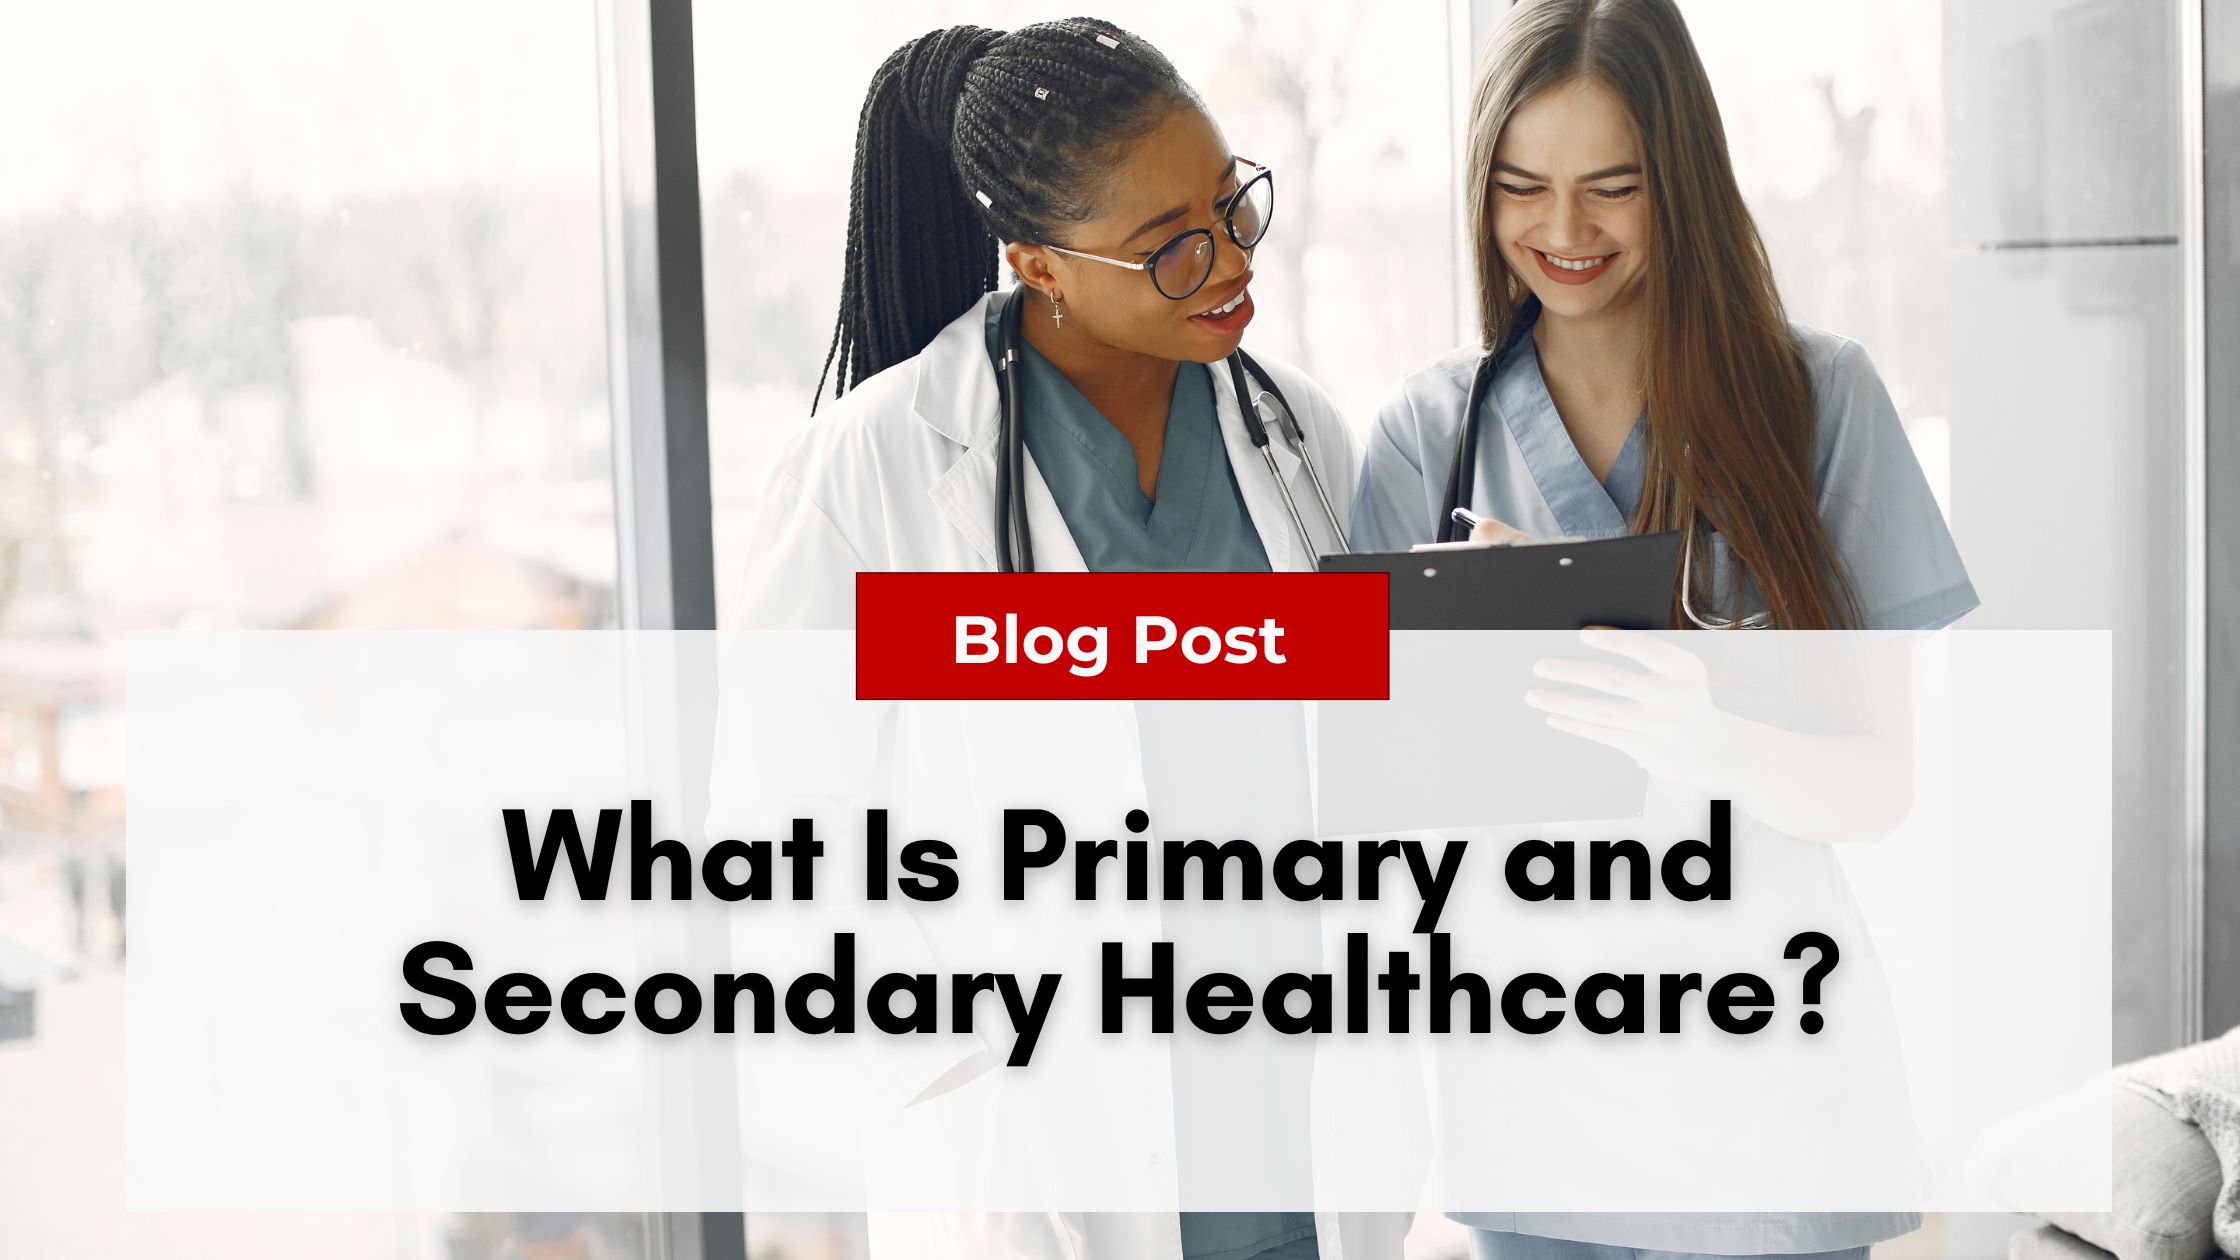 Two healthcare professionals, one in a white coat and one in scrubs, discuss something on a clipboard. Text overlay reads, "Blog Post: What Is Primary and Secondary Healthcare?" Learn how nurse practitioner burnout impacts both.